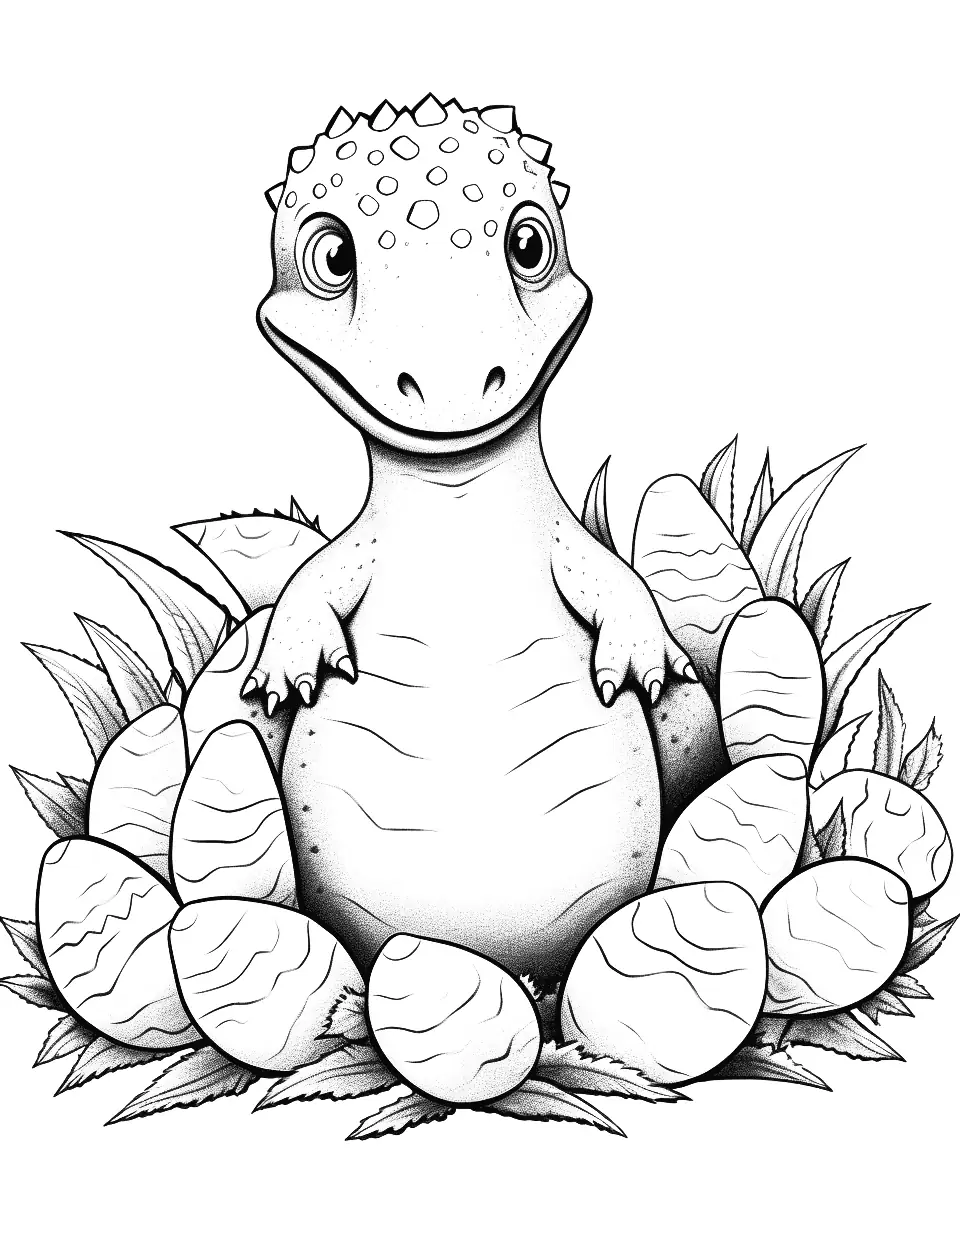 Baby Dino Hatchlings Coloring Page - Baby dinosaur hatchlings emerging from their eggs.